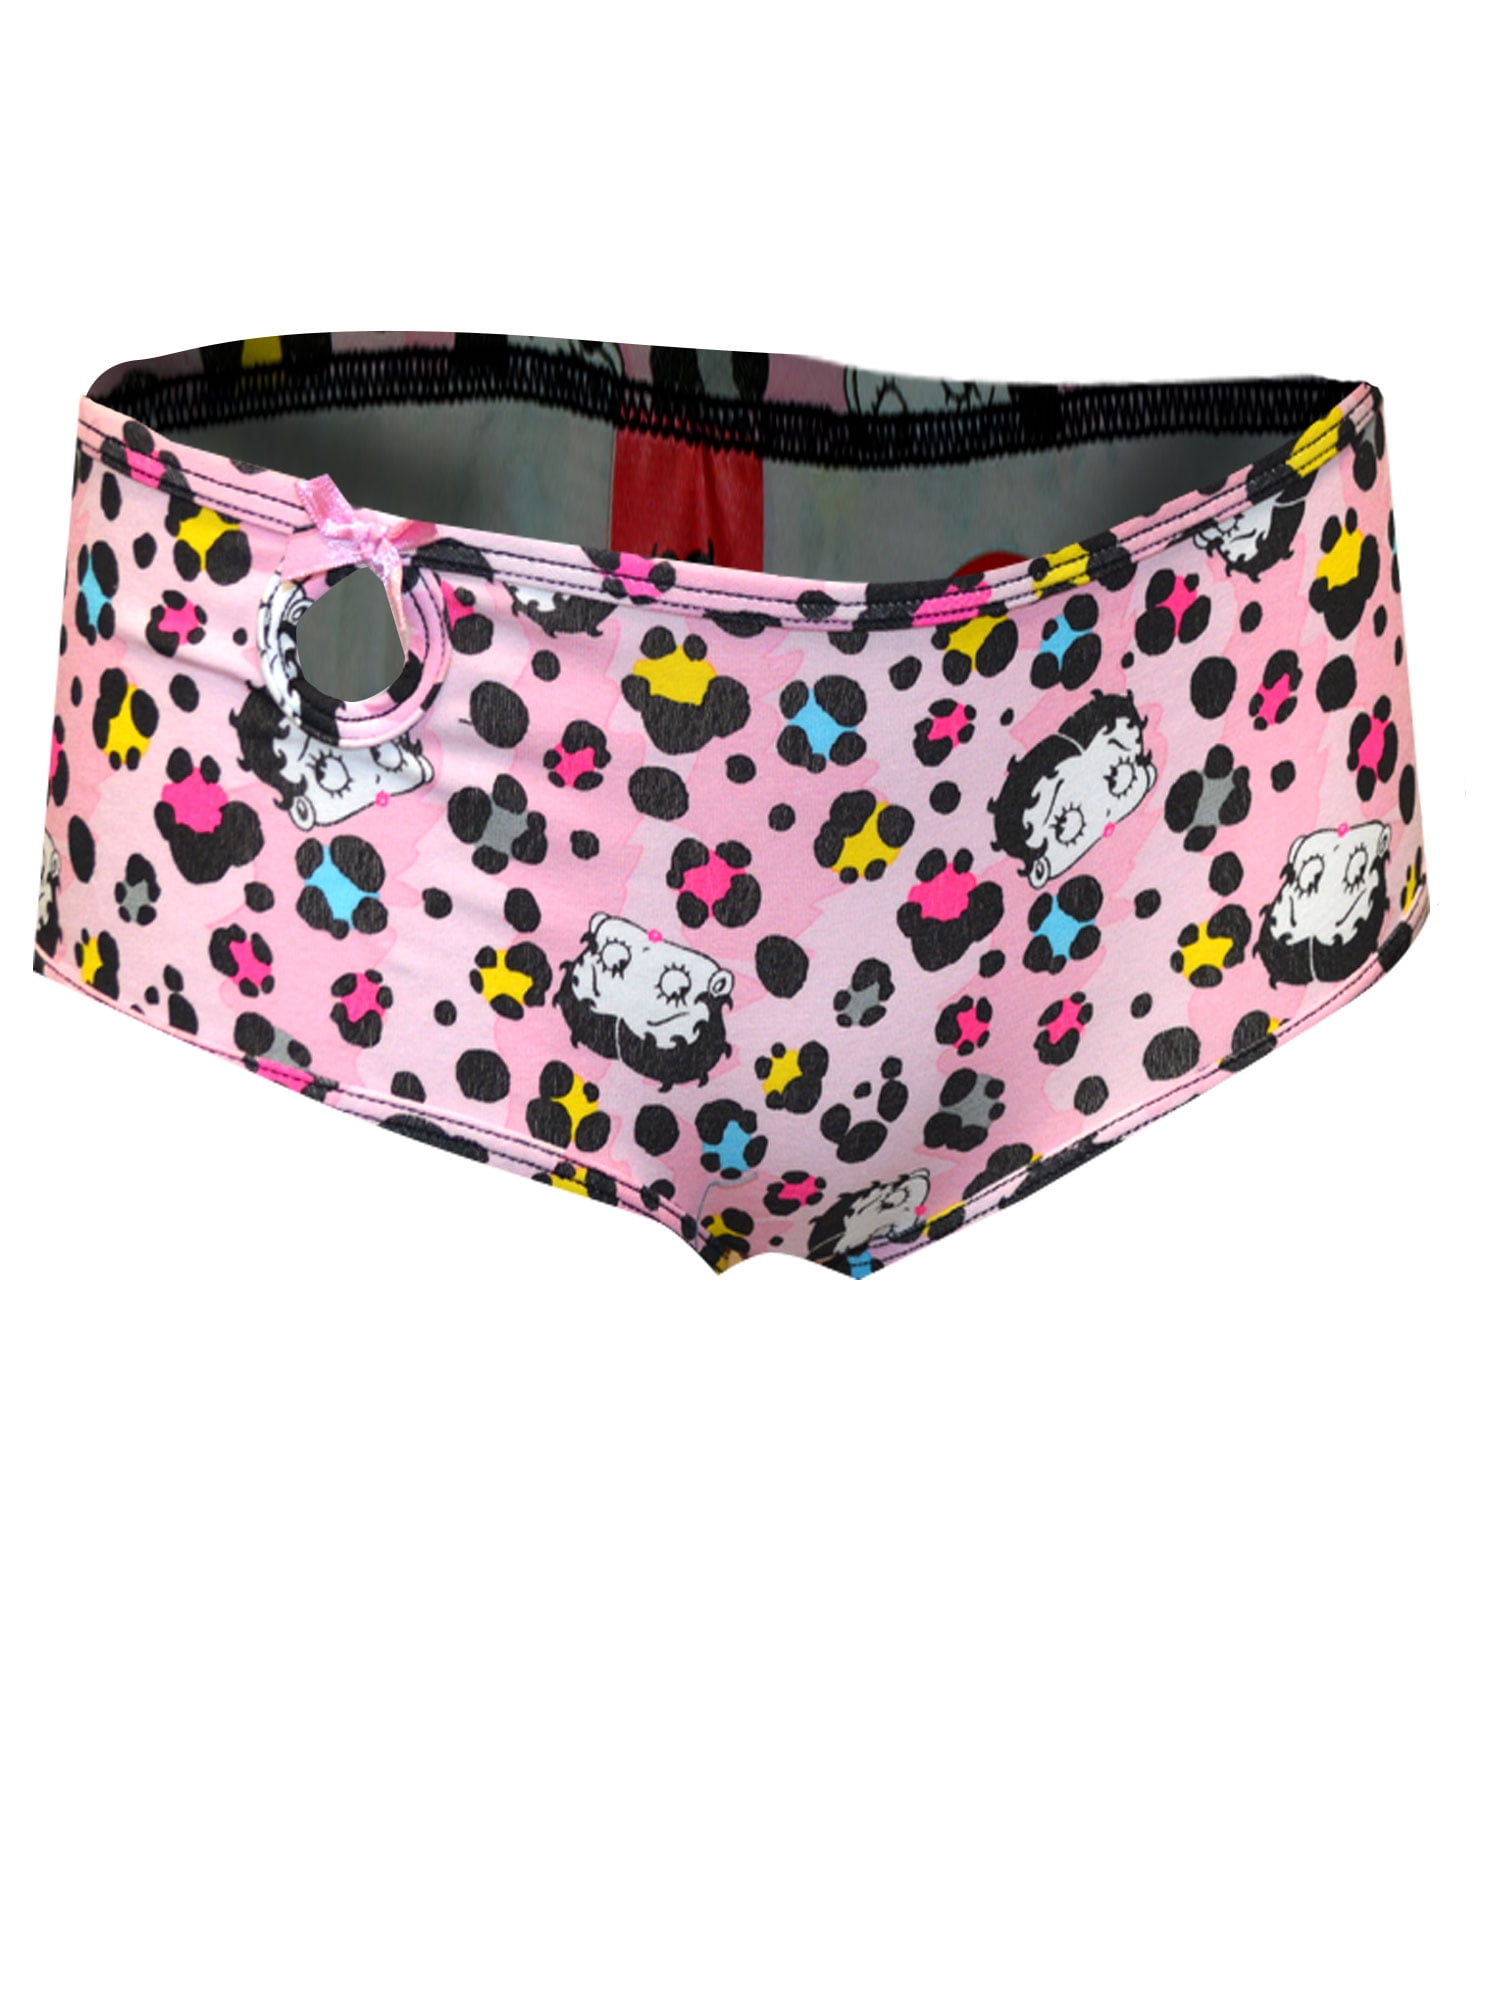 Hello Kitty Panties, these are a ladies boy shorts style,…